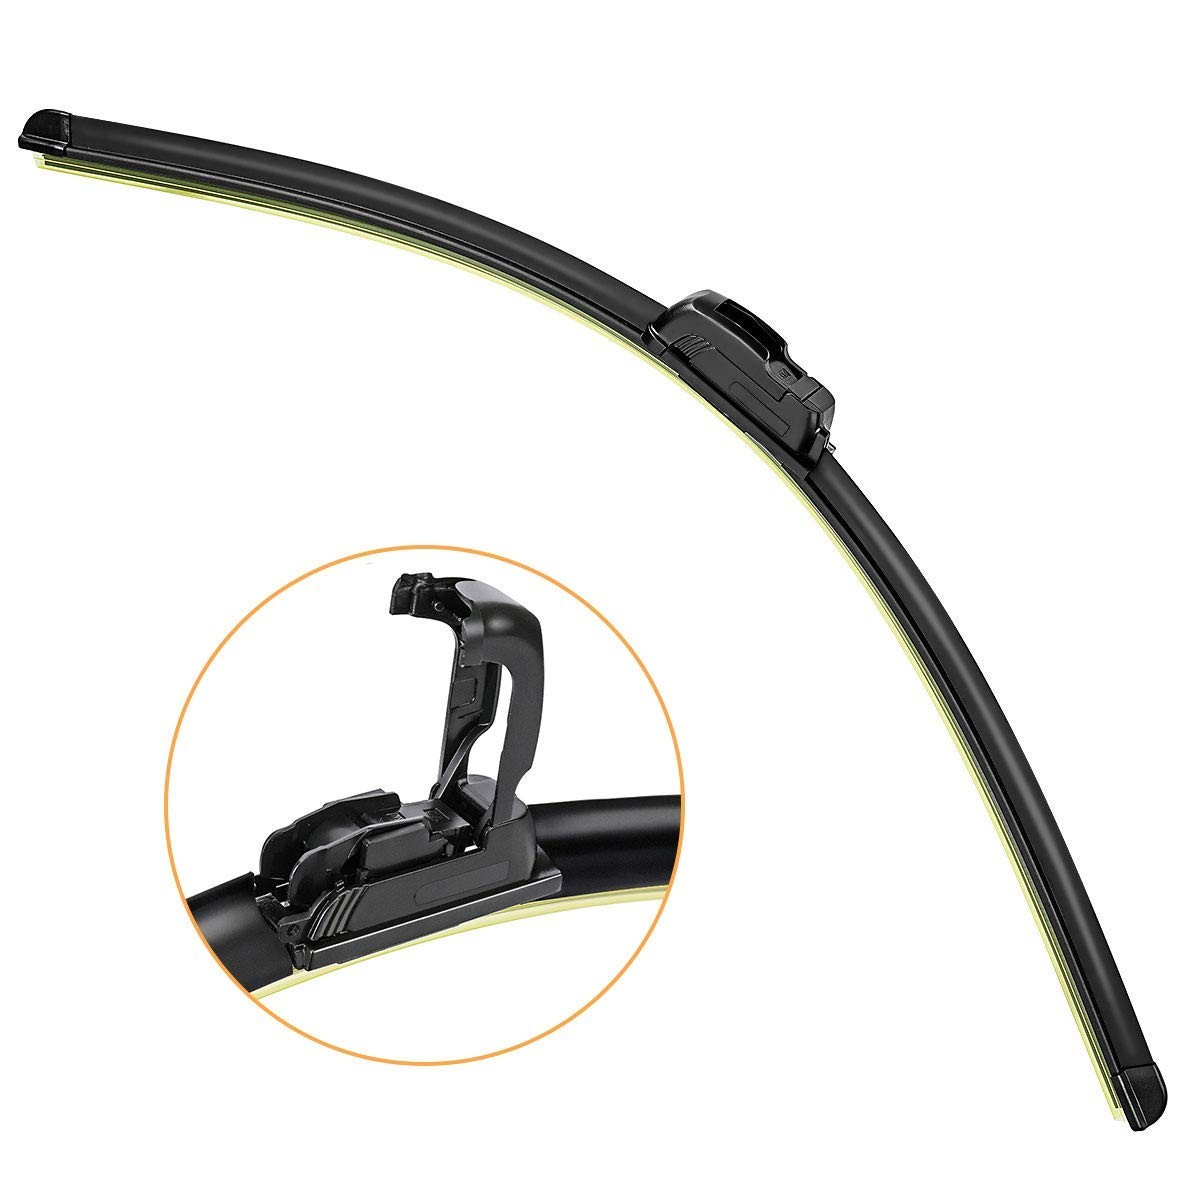 Audew Wiper Blade-Universal Windshield Wiper,Replaceable Rubber Blade for All Cars,Frameless and Sof